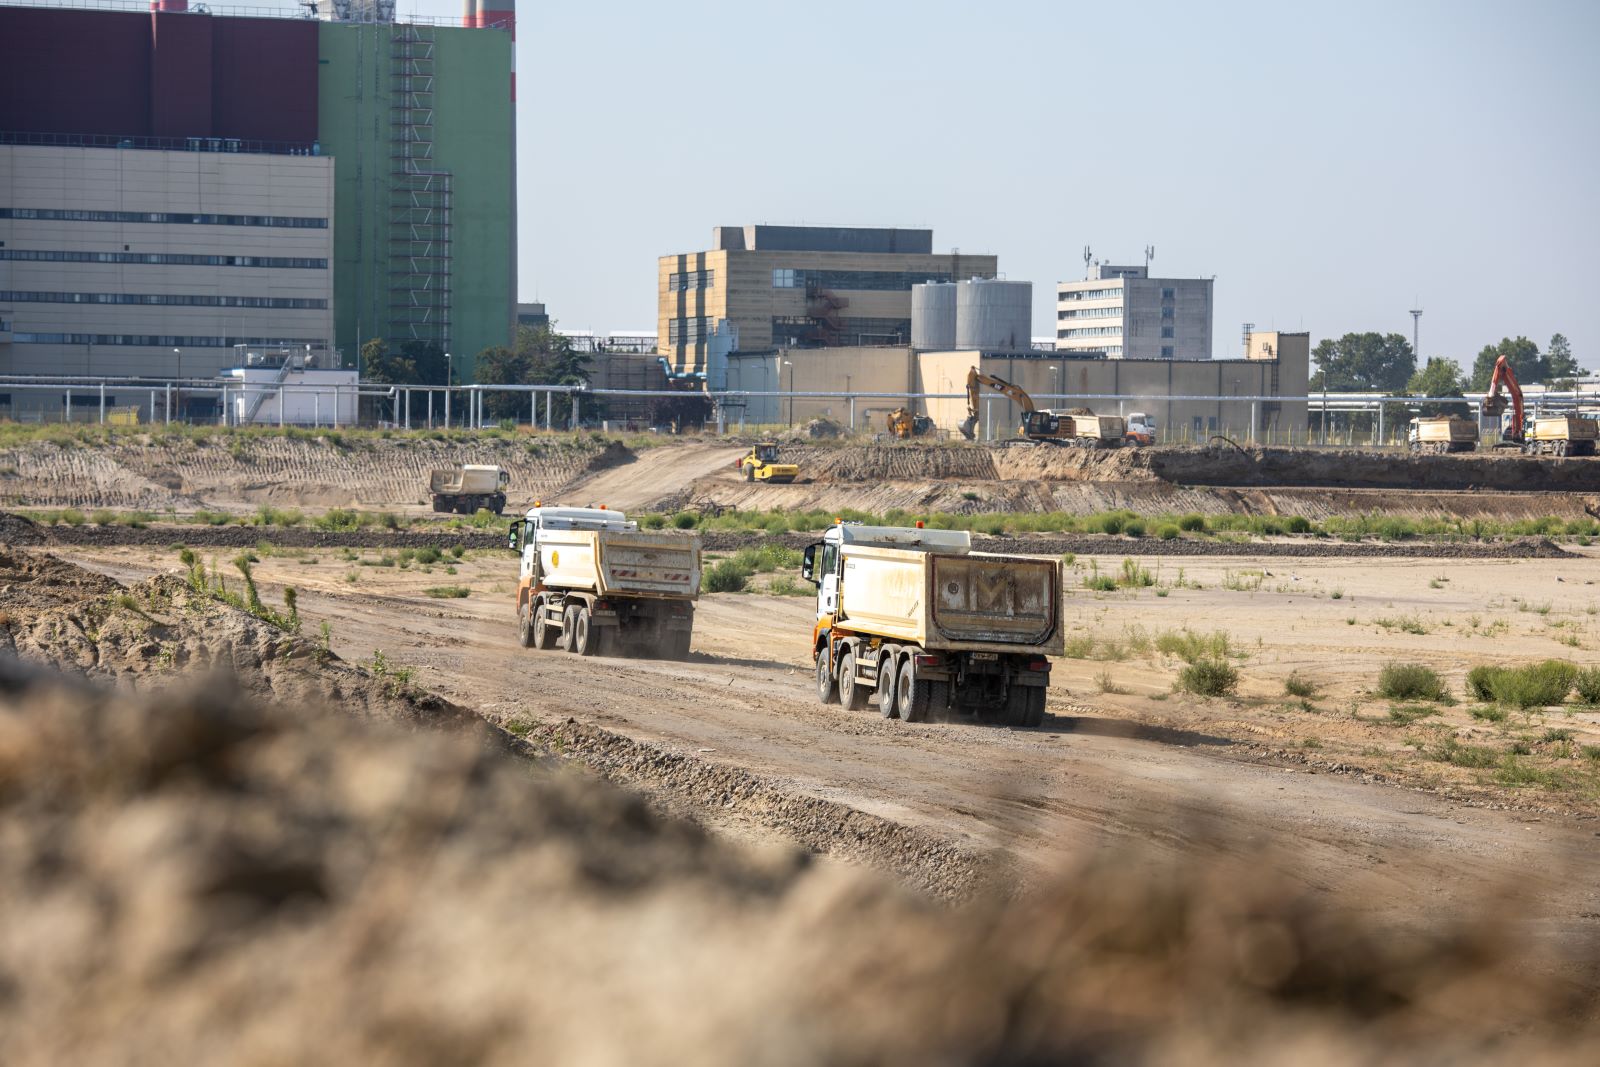 No More Obstacles to the Expansion of the Paks Nuclear Power Plant